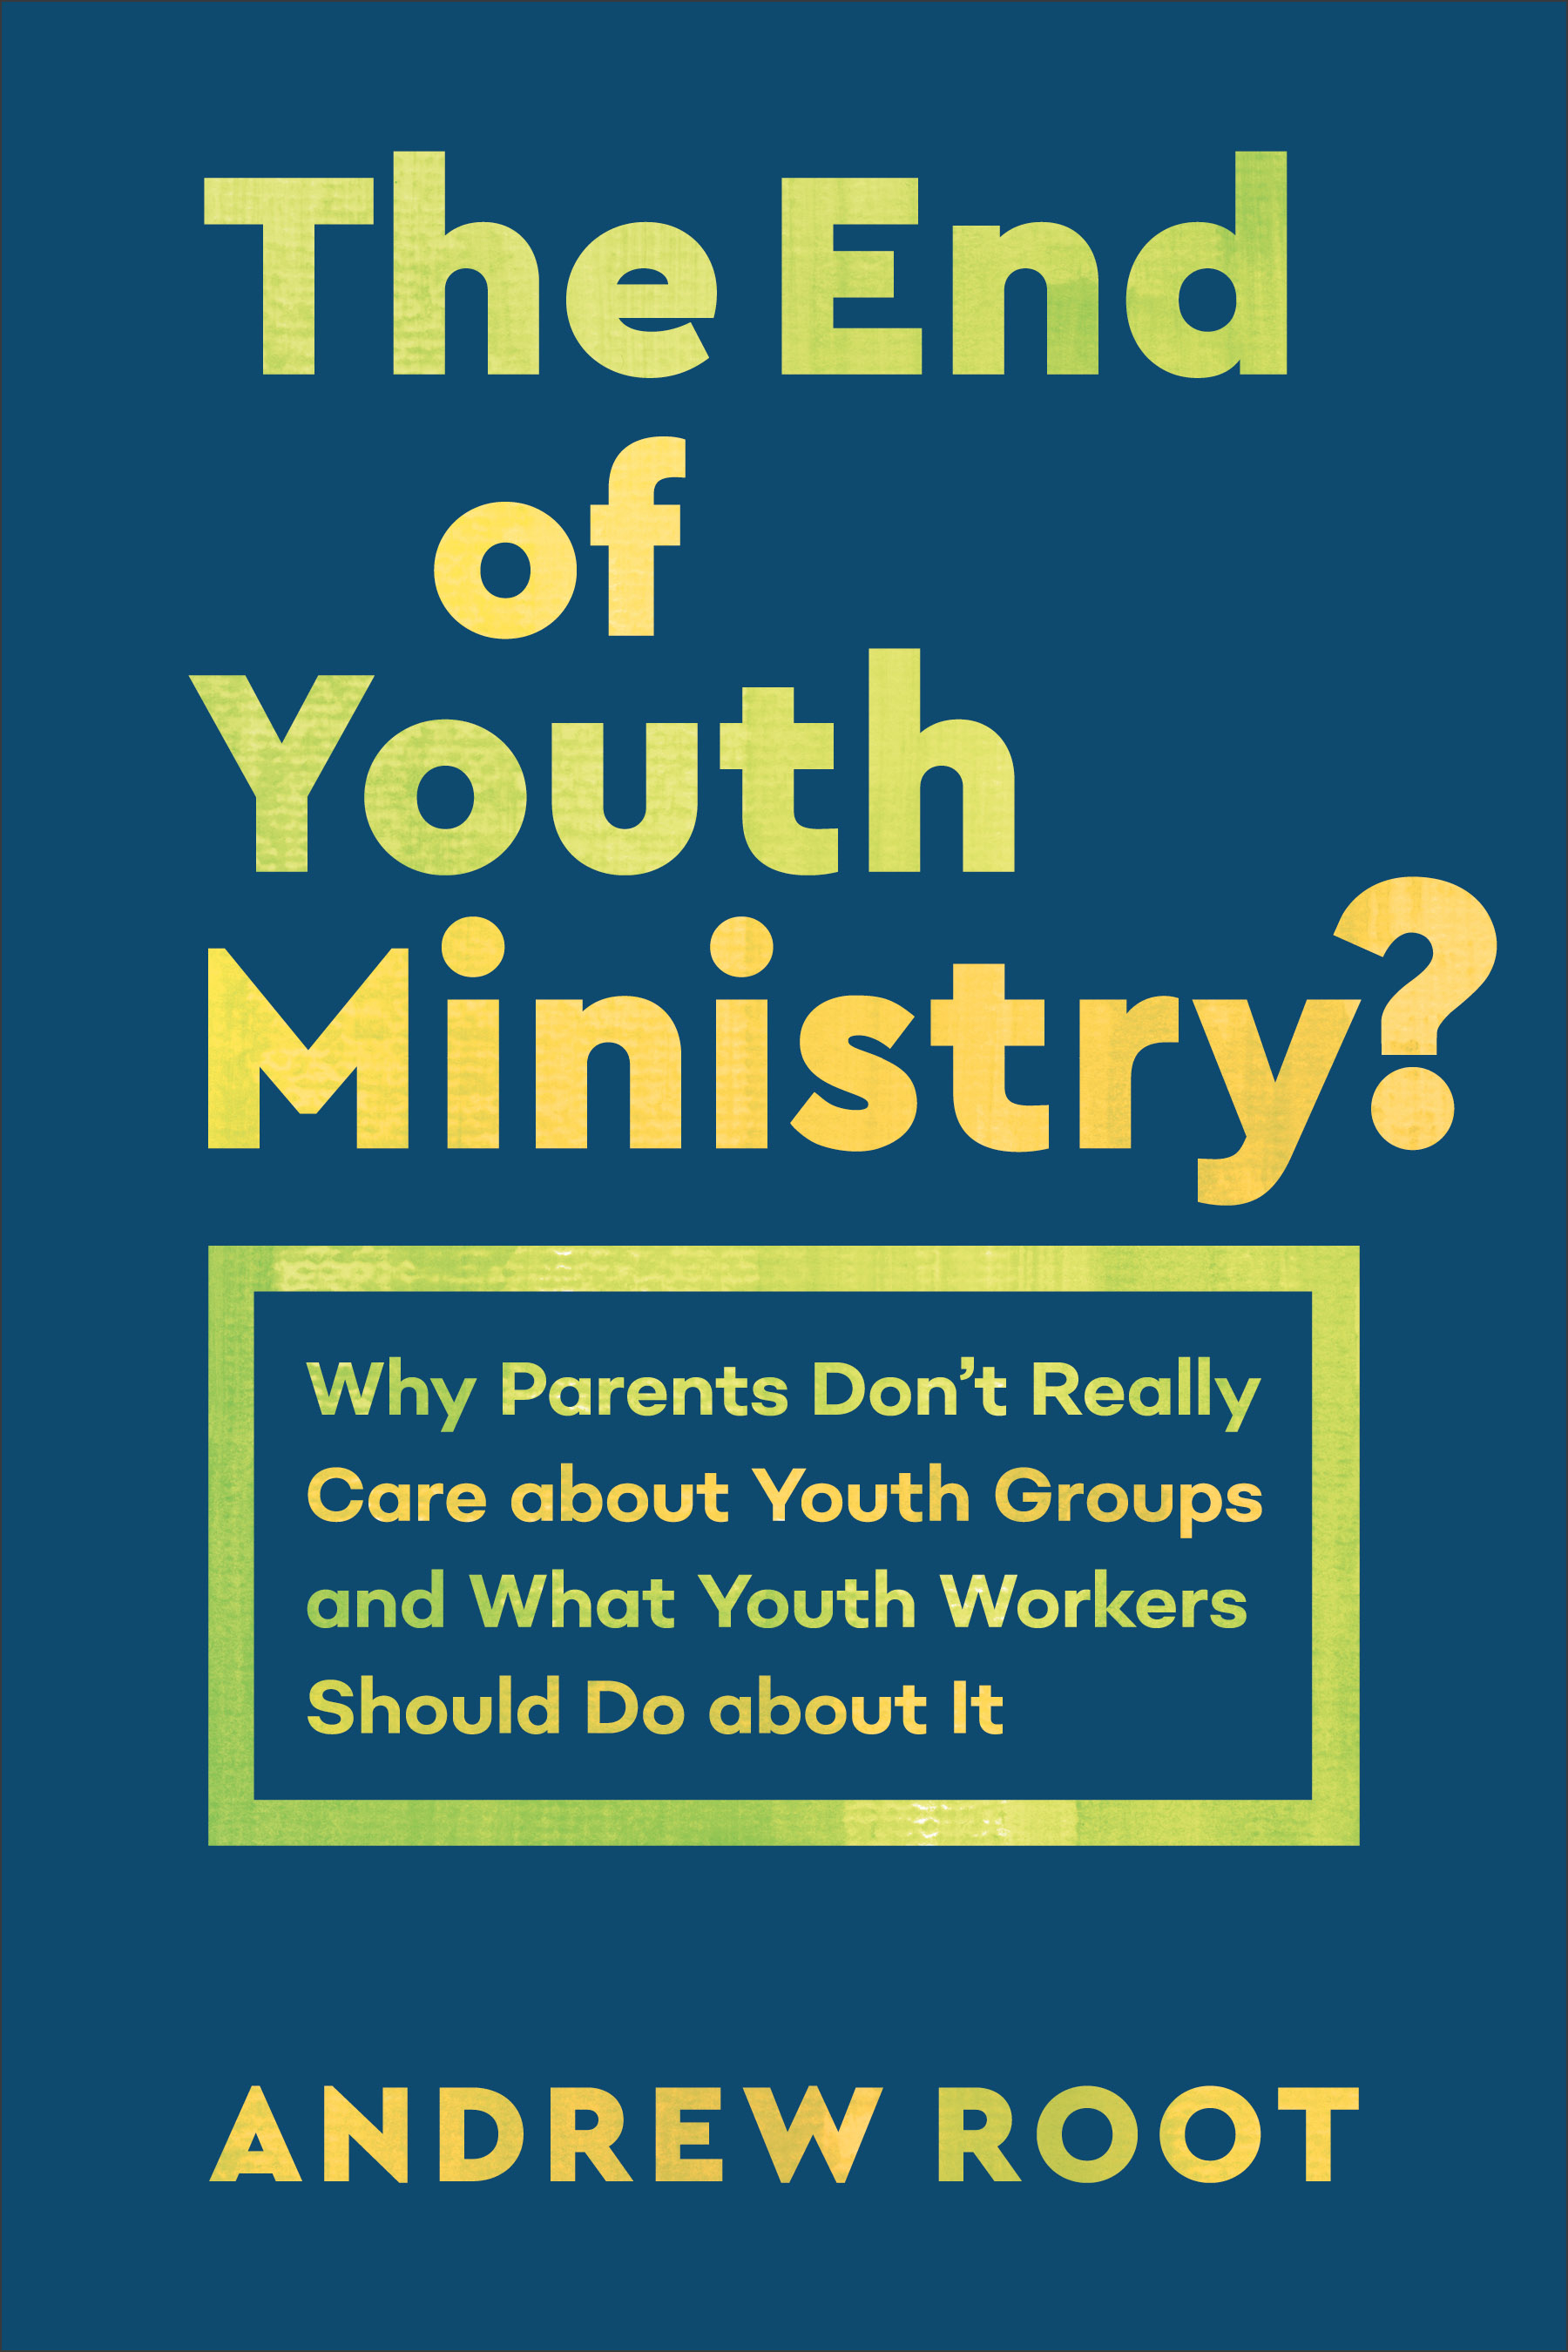 The End of Youth Ministry? (Theology for the Life of the World)